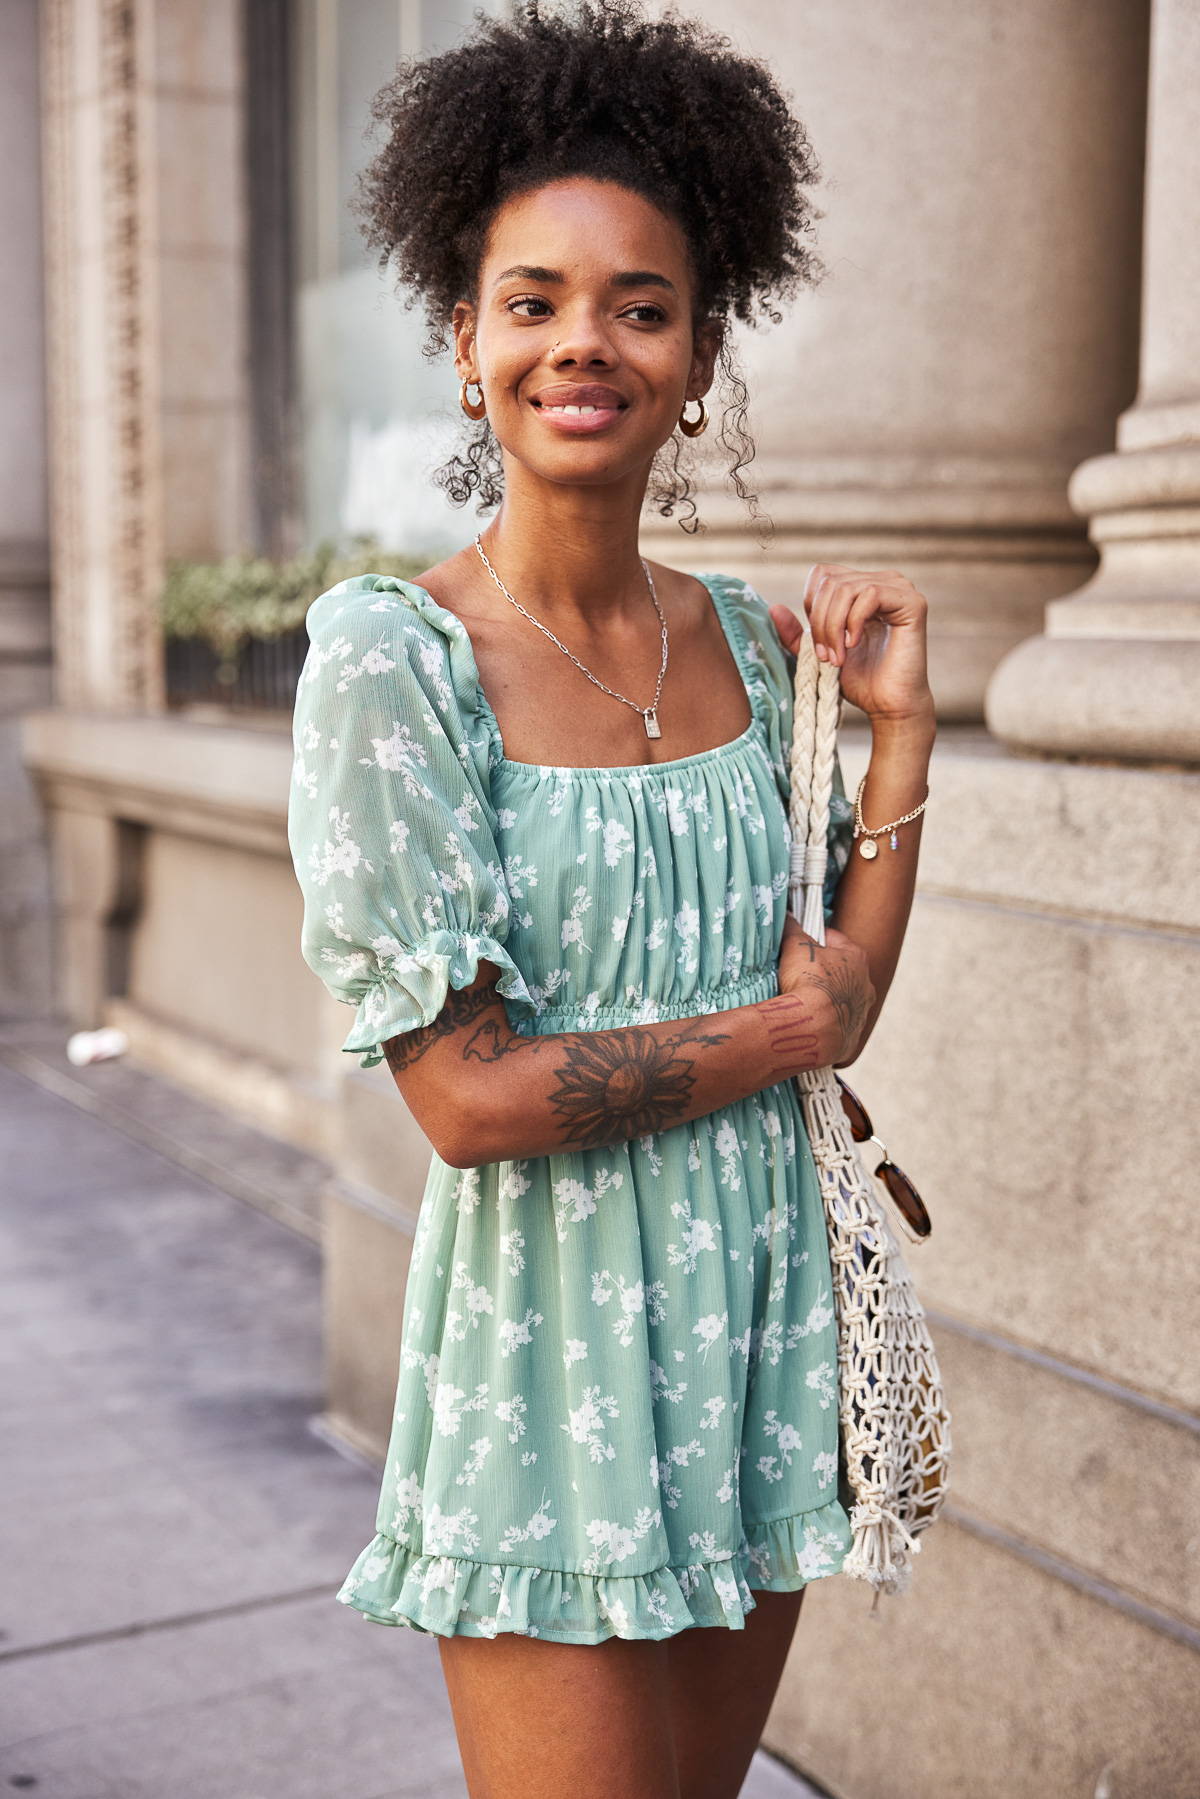 Sage green white floral printed romper on girl in the city.